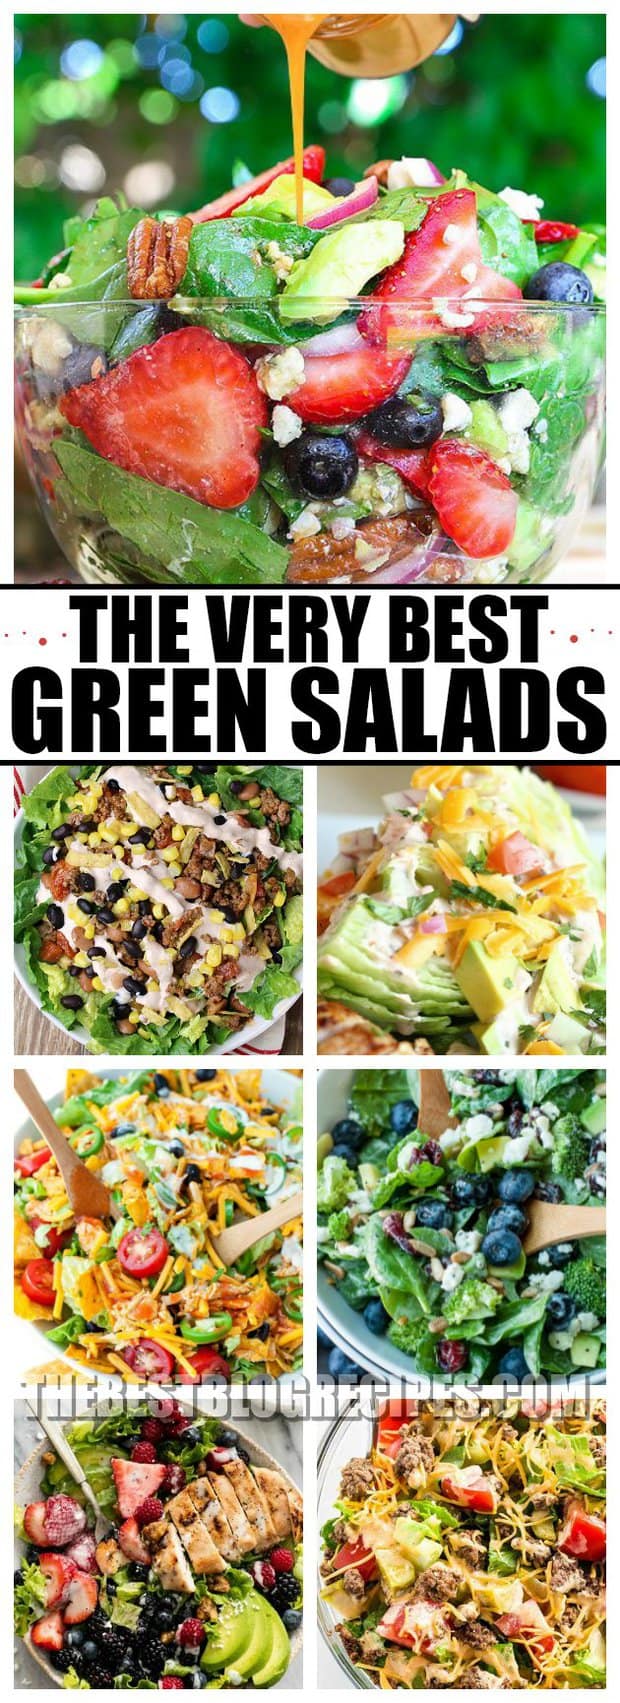 THE VERY BEST GREEN SALADS